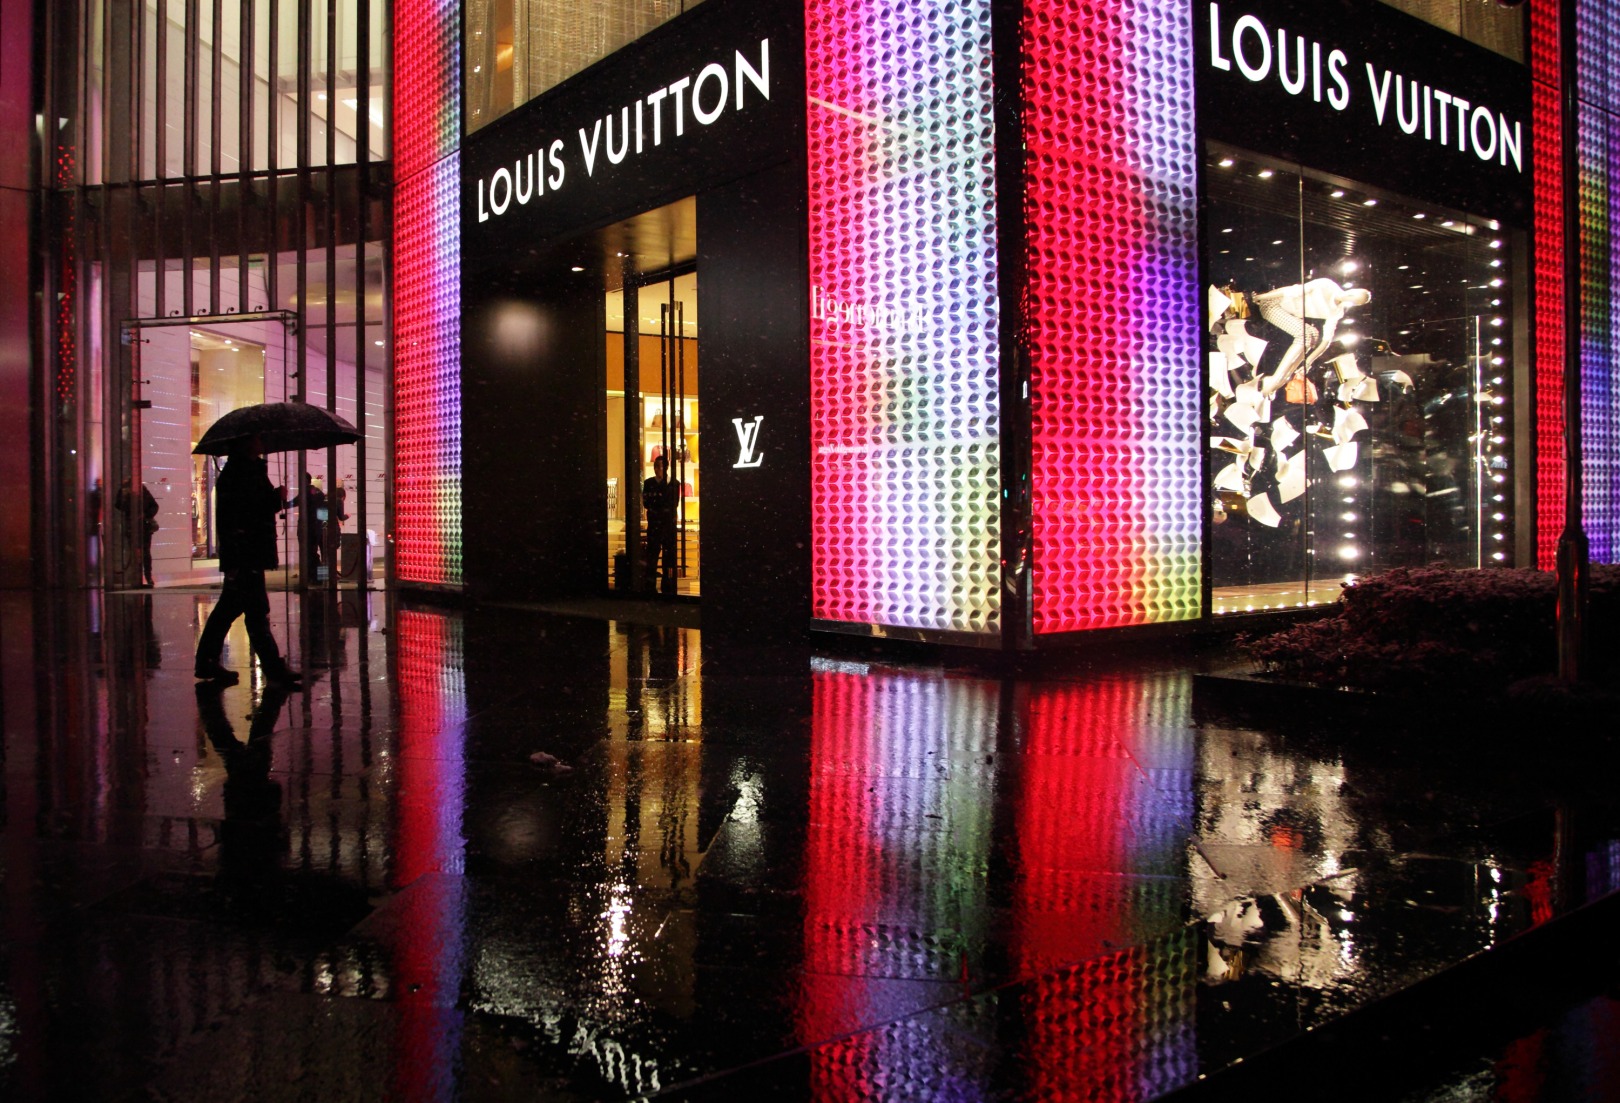 Louis Vuitton Opens China E-Commerce Store - Bloomberg